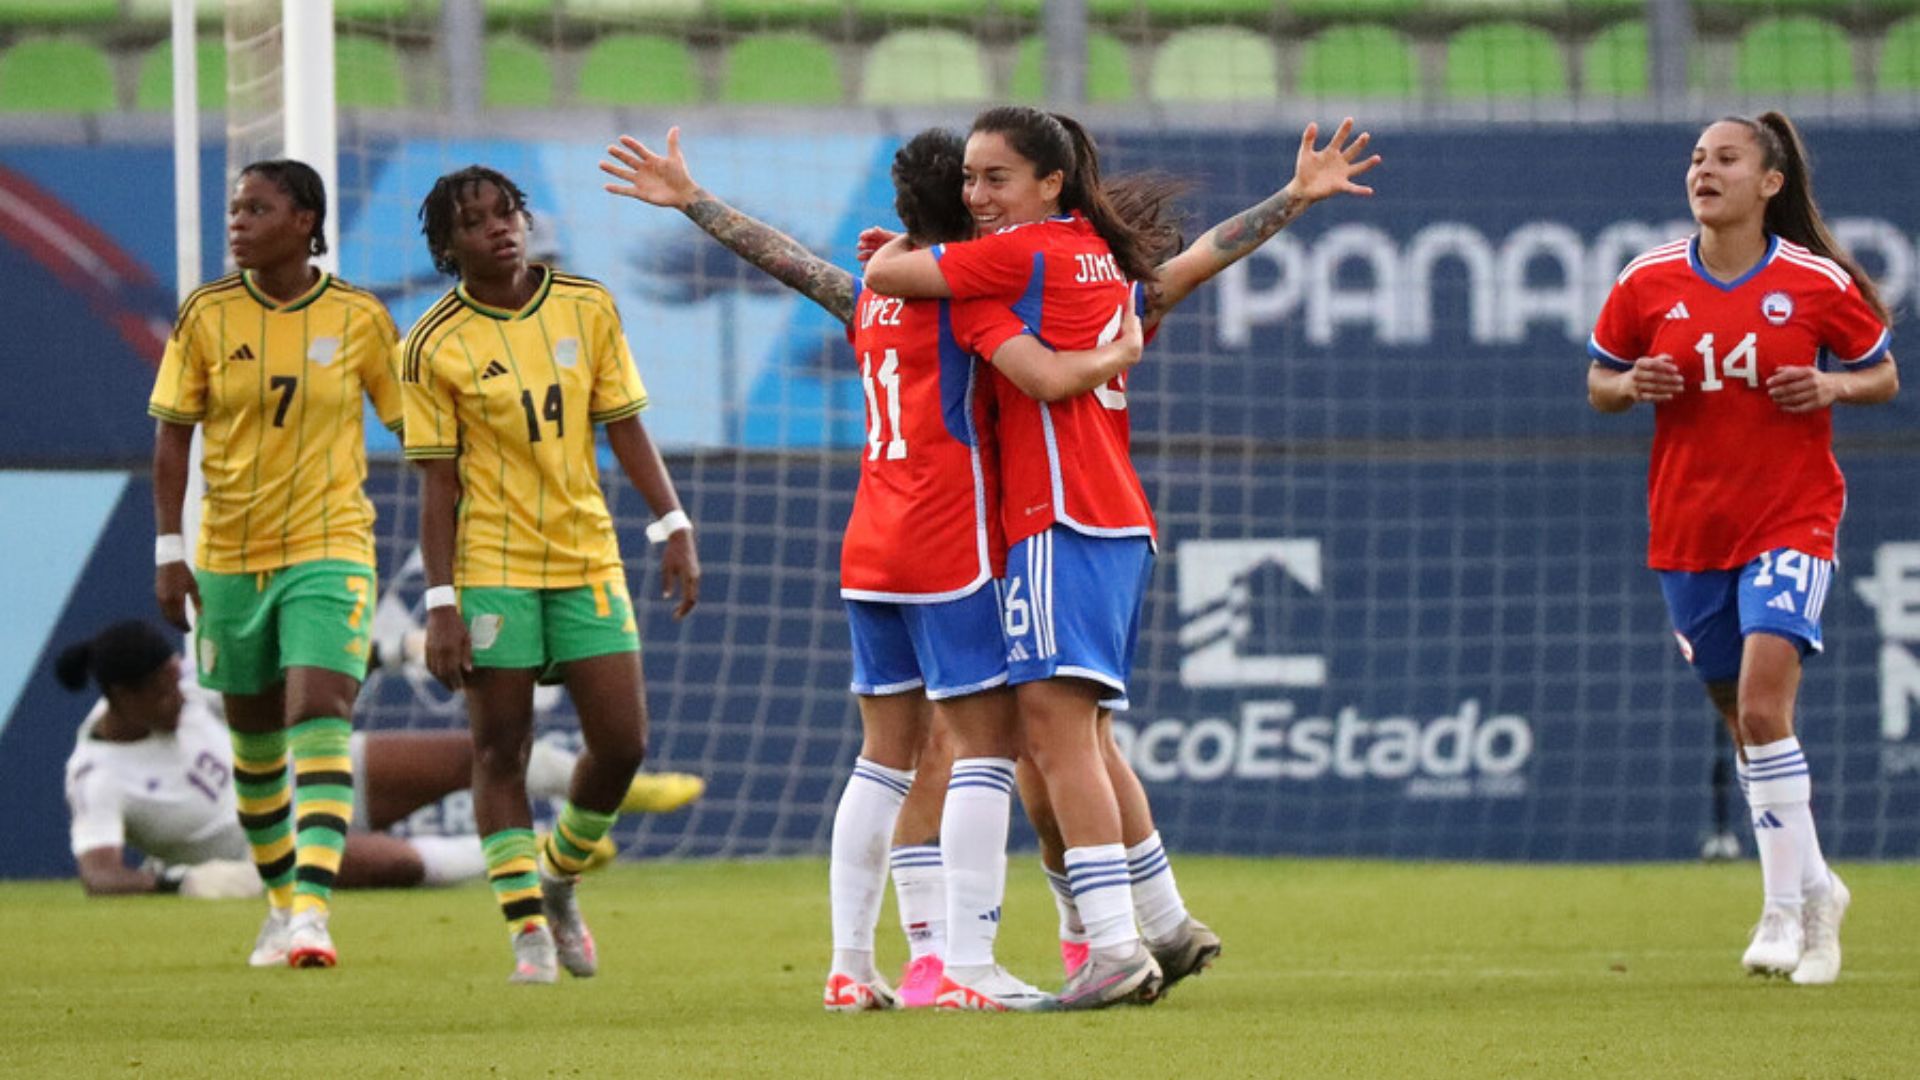 Female “La Roja” secure big win against Jamaica and aim for medals